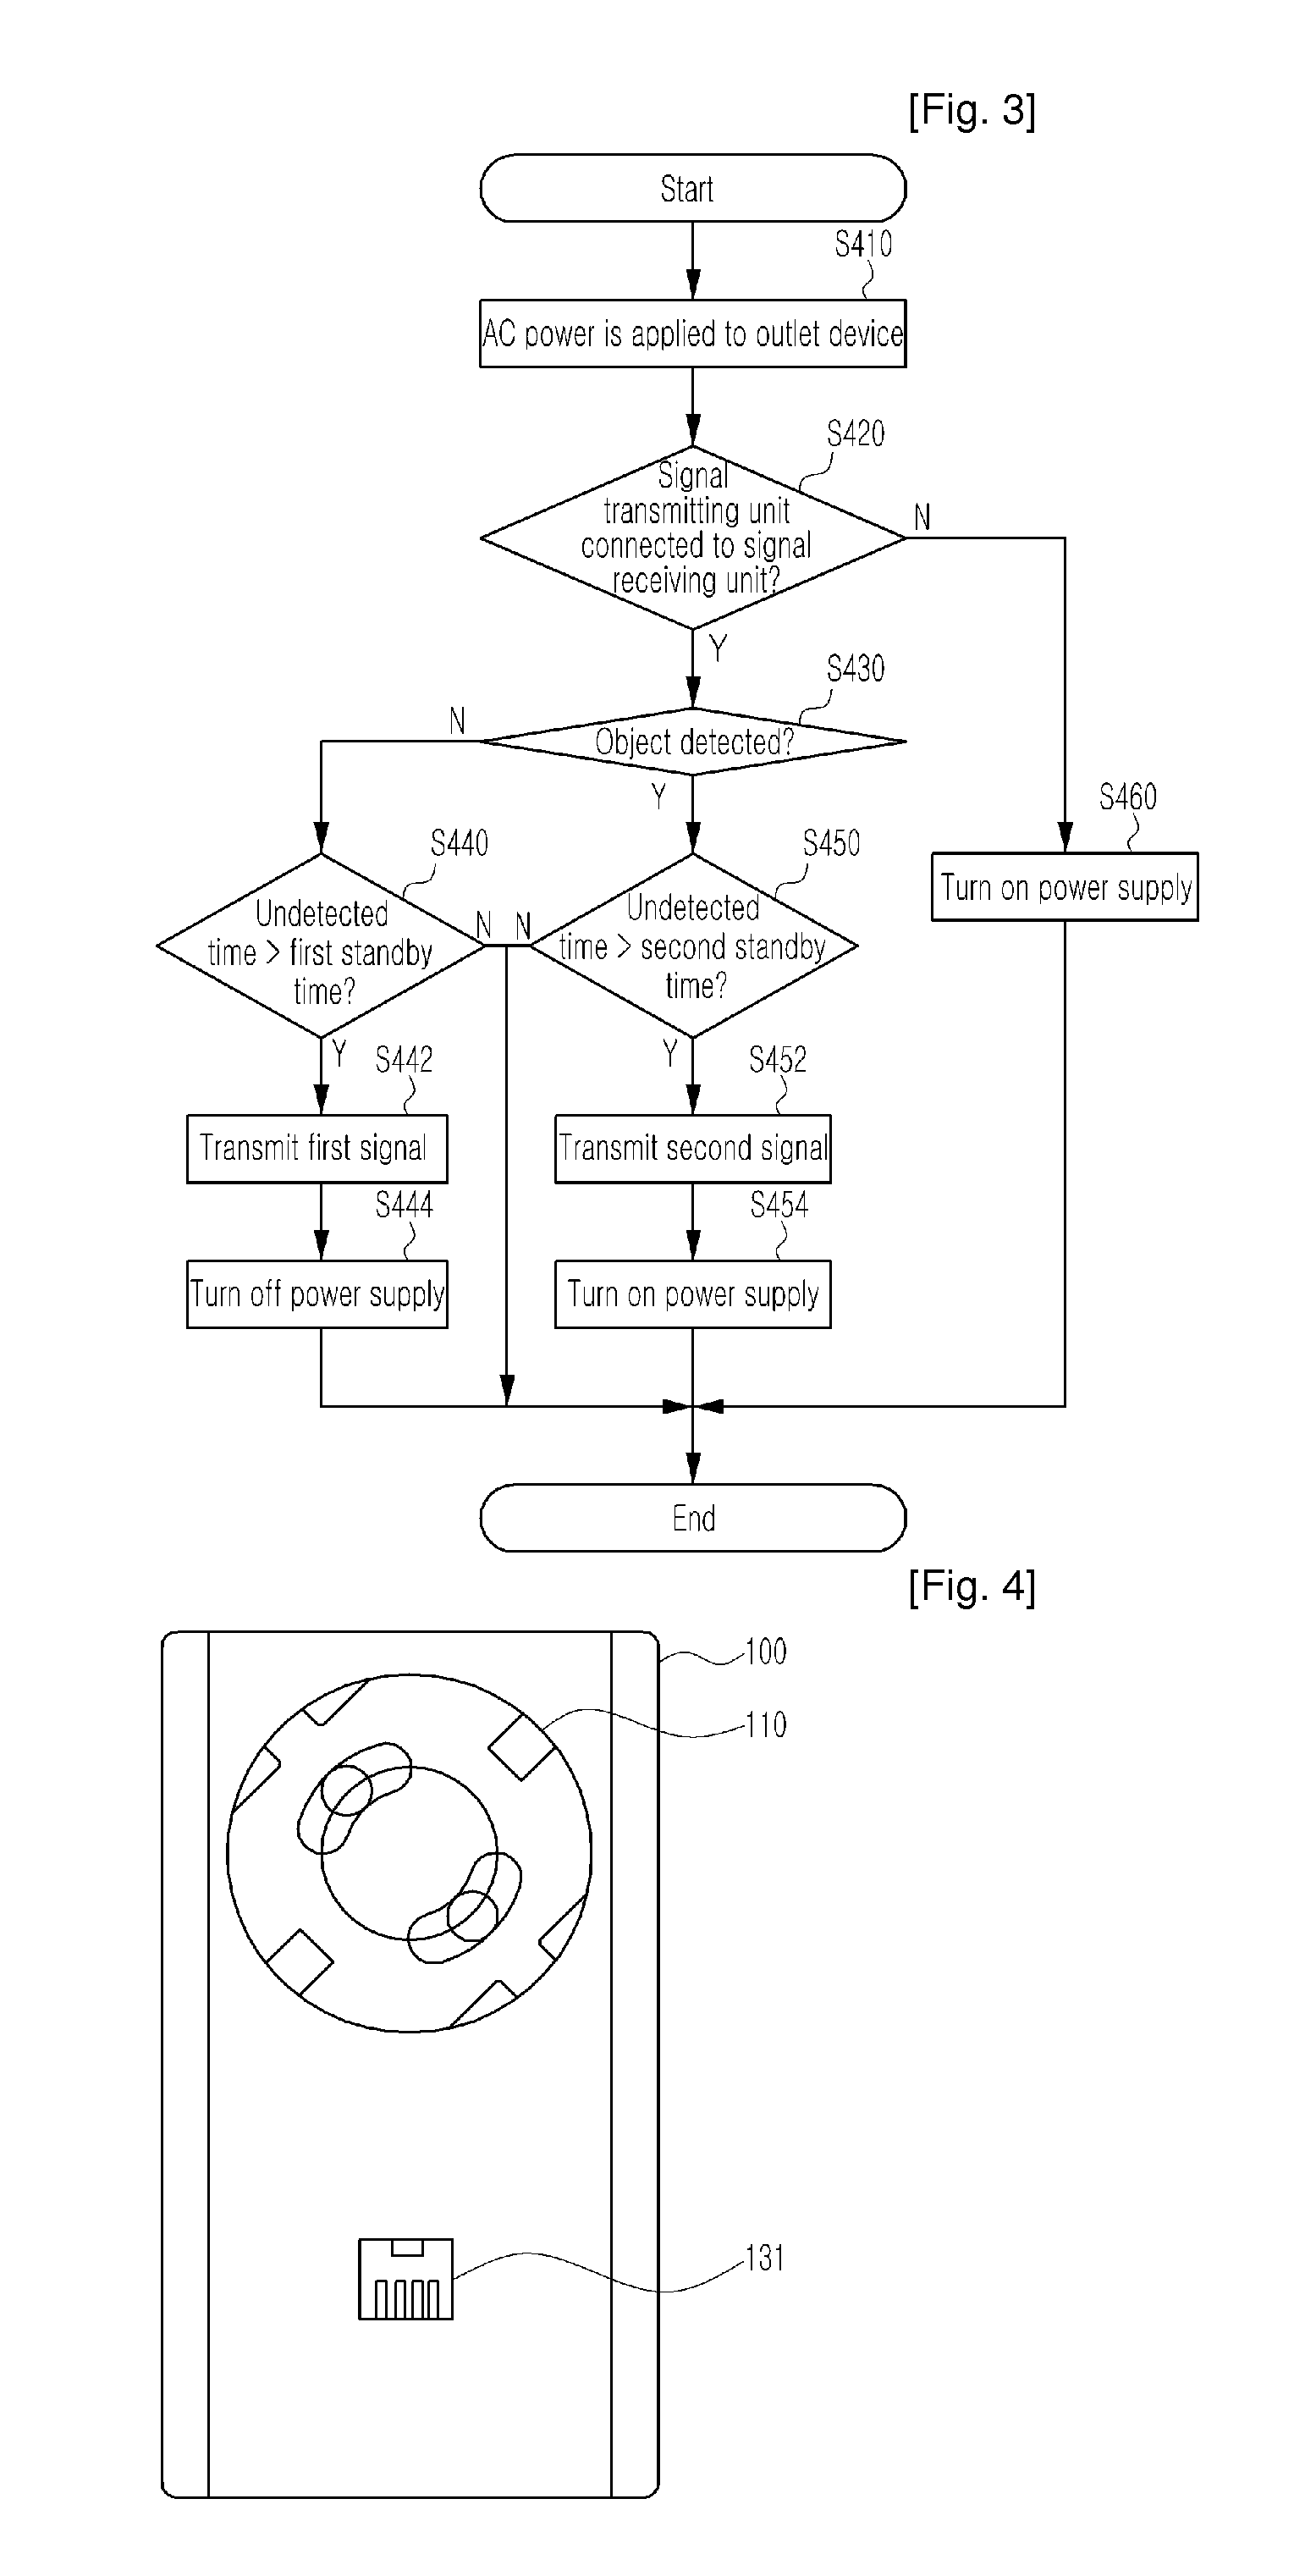 System controlling electric power and system controlling valve